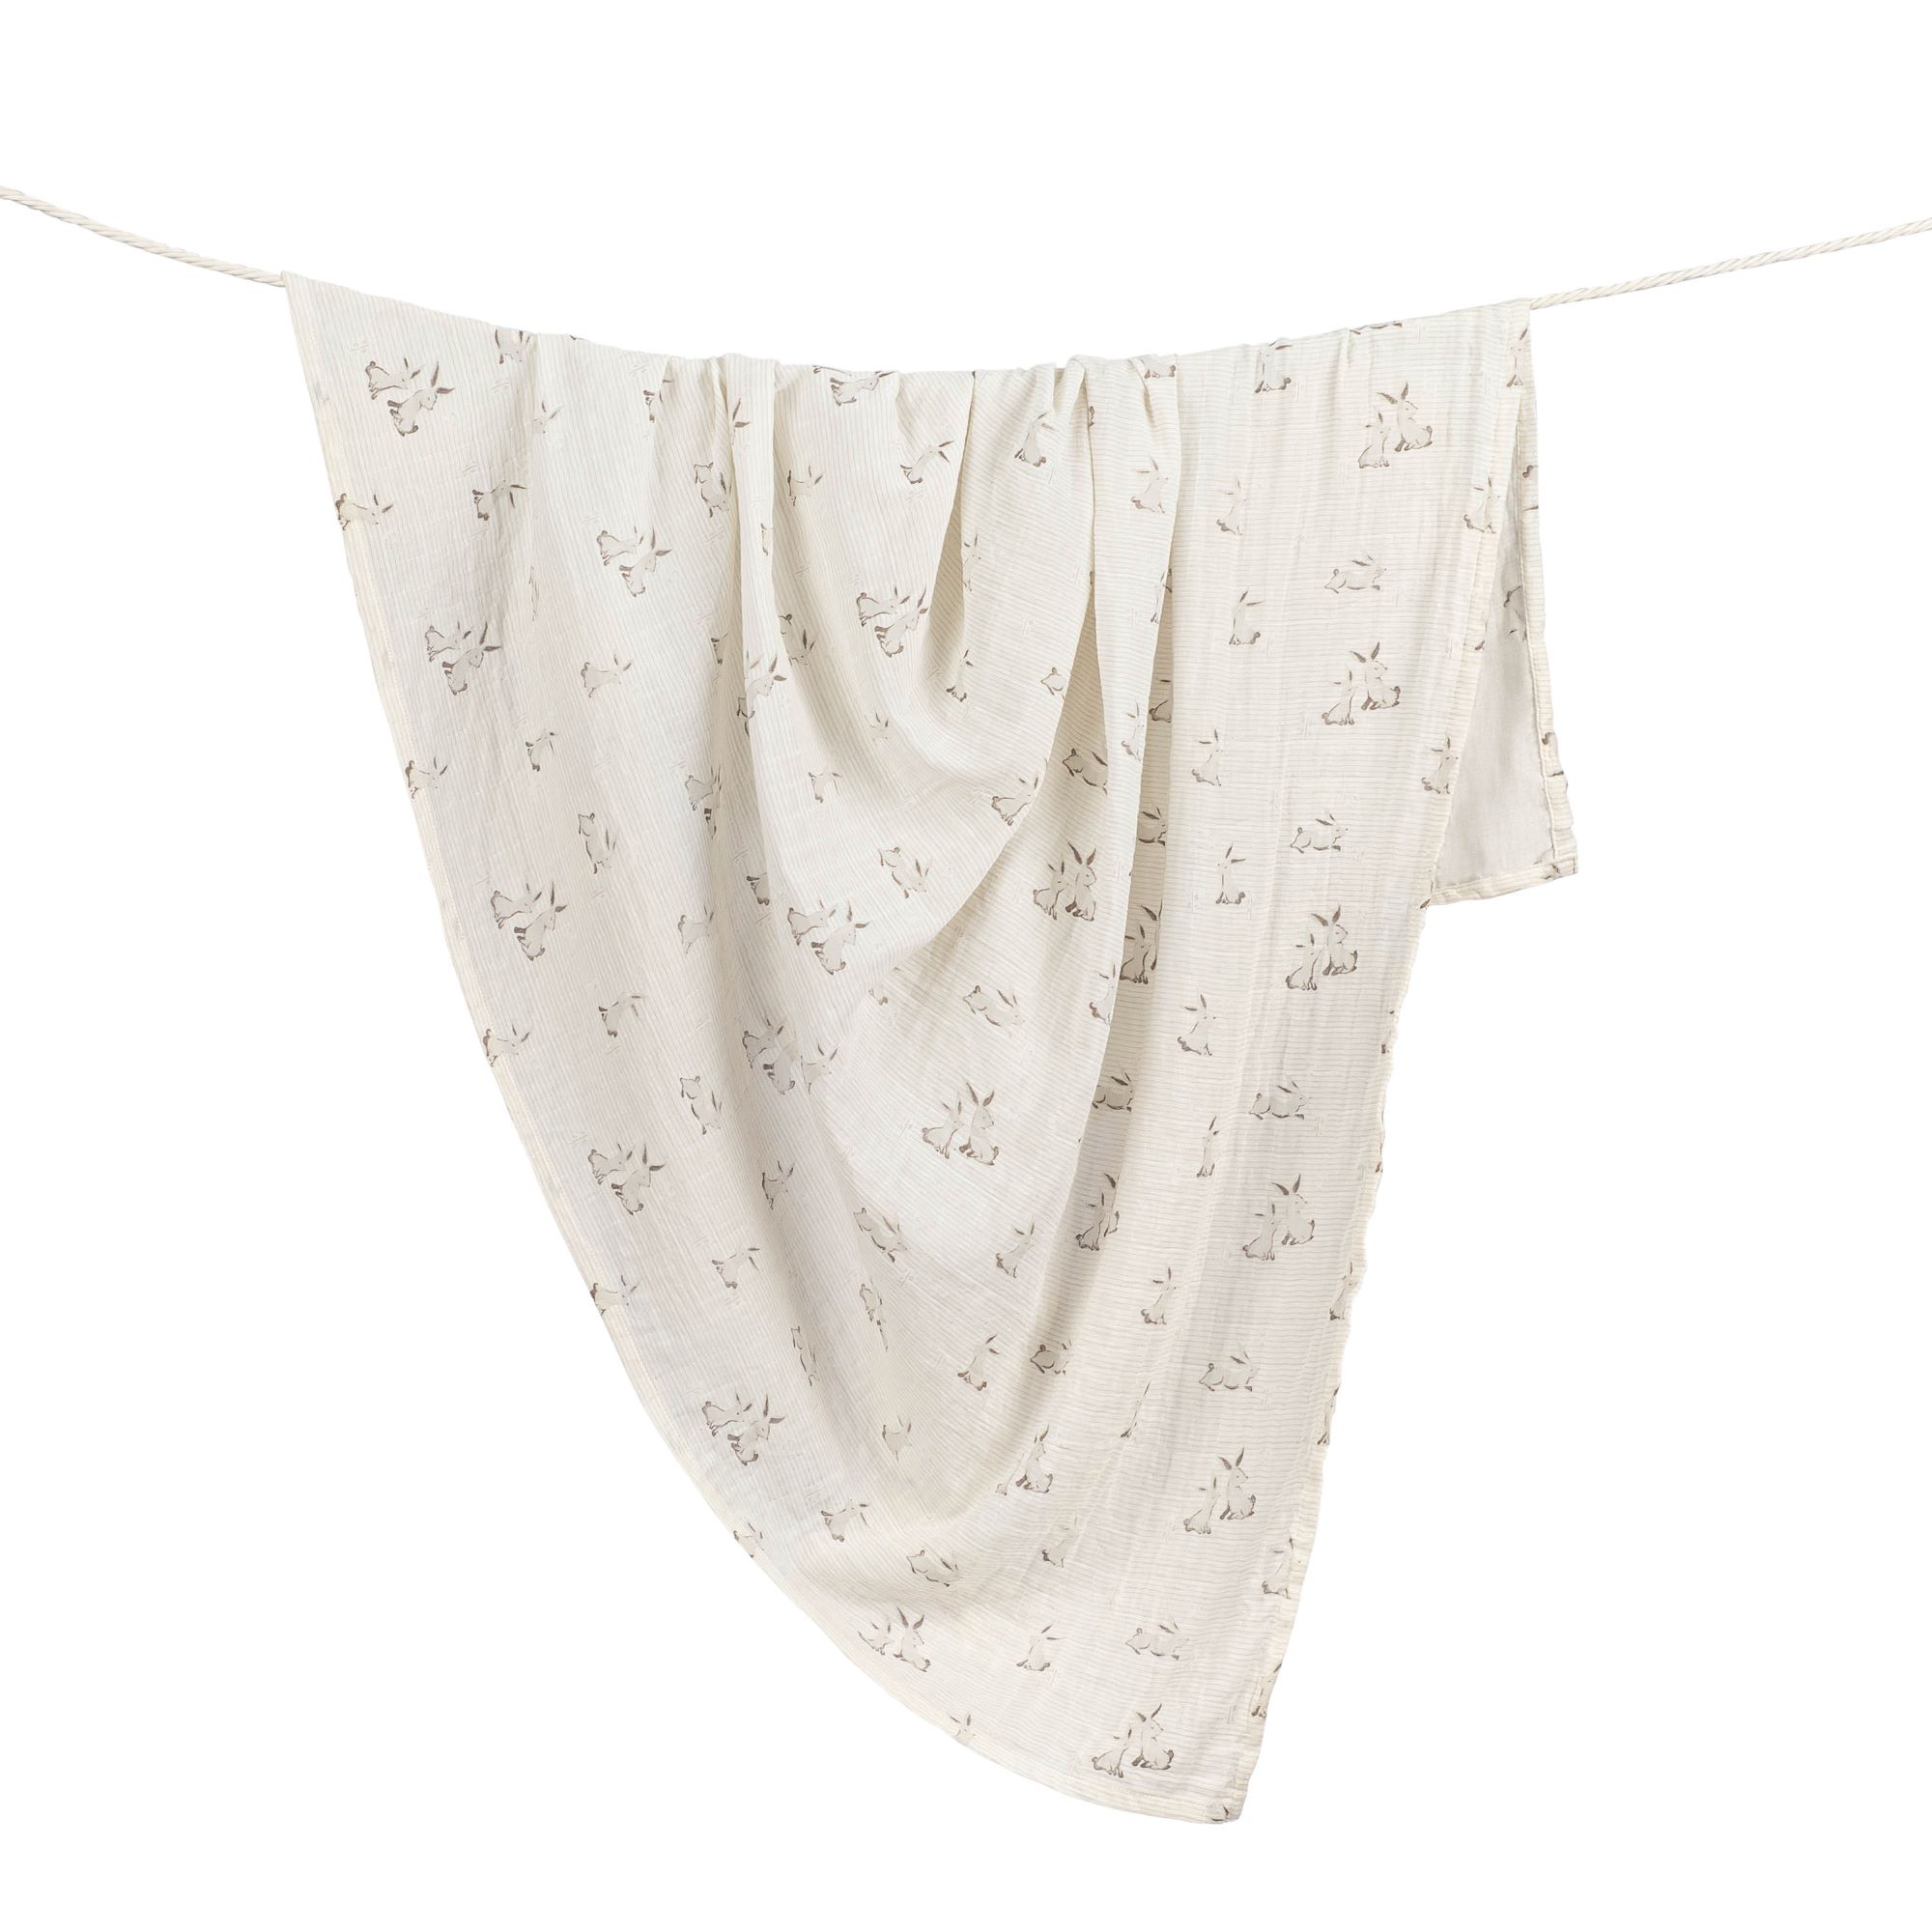 Baby swaddle hanging on a clothesline